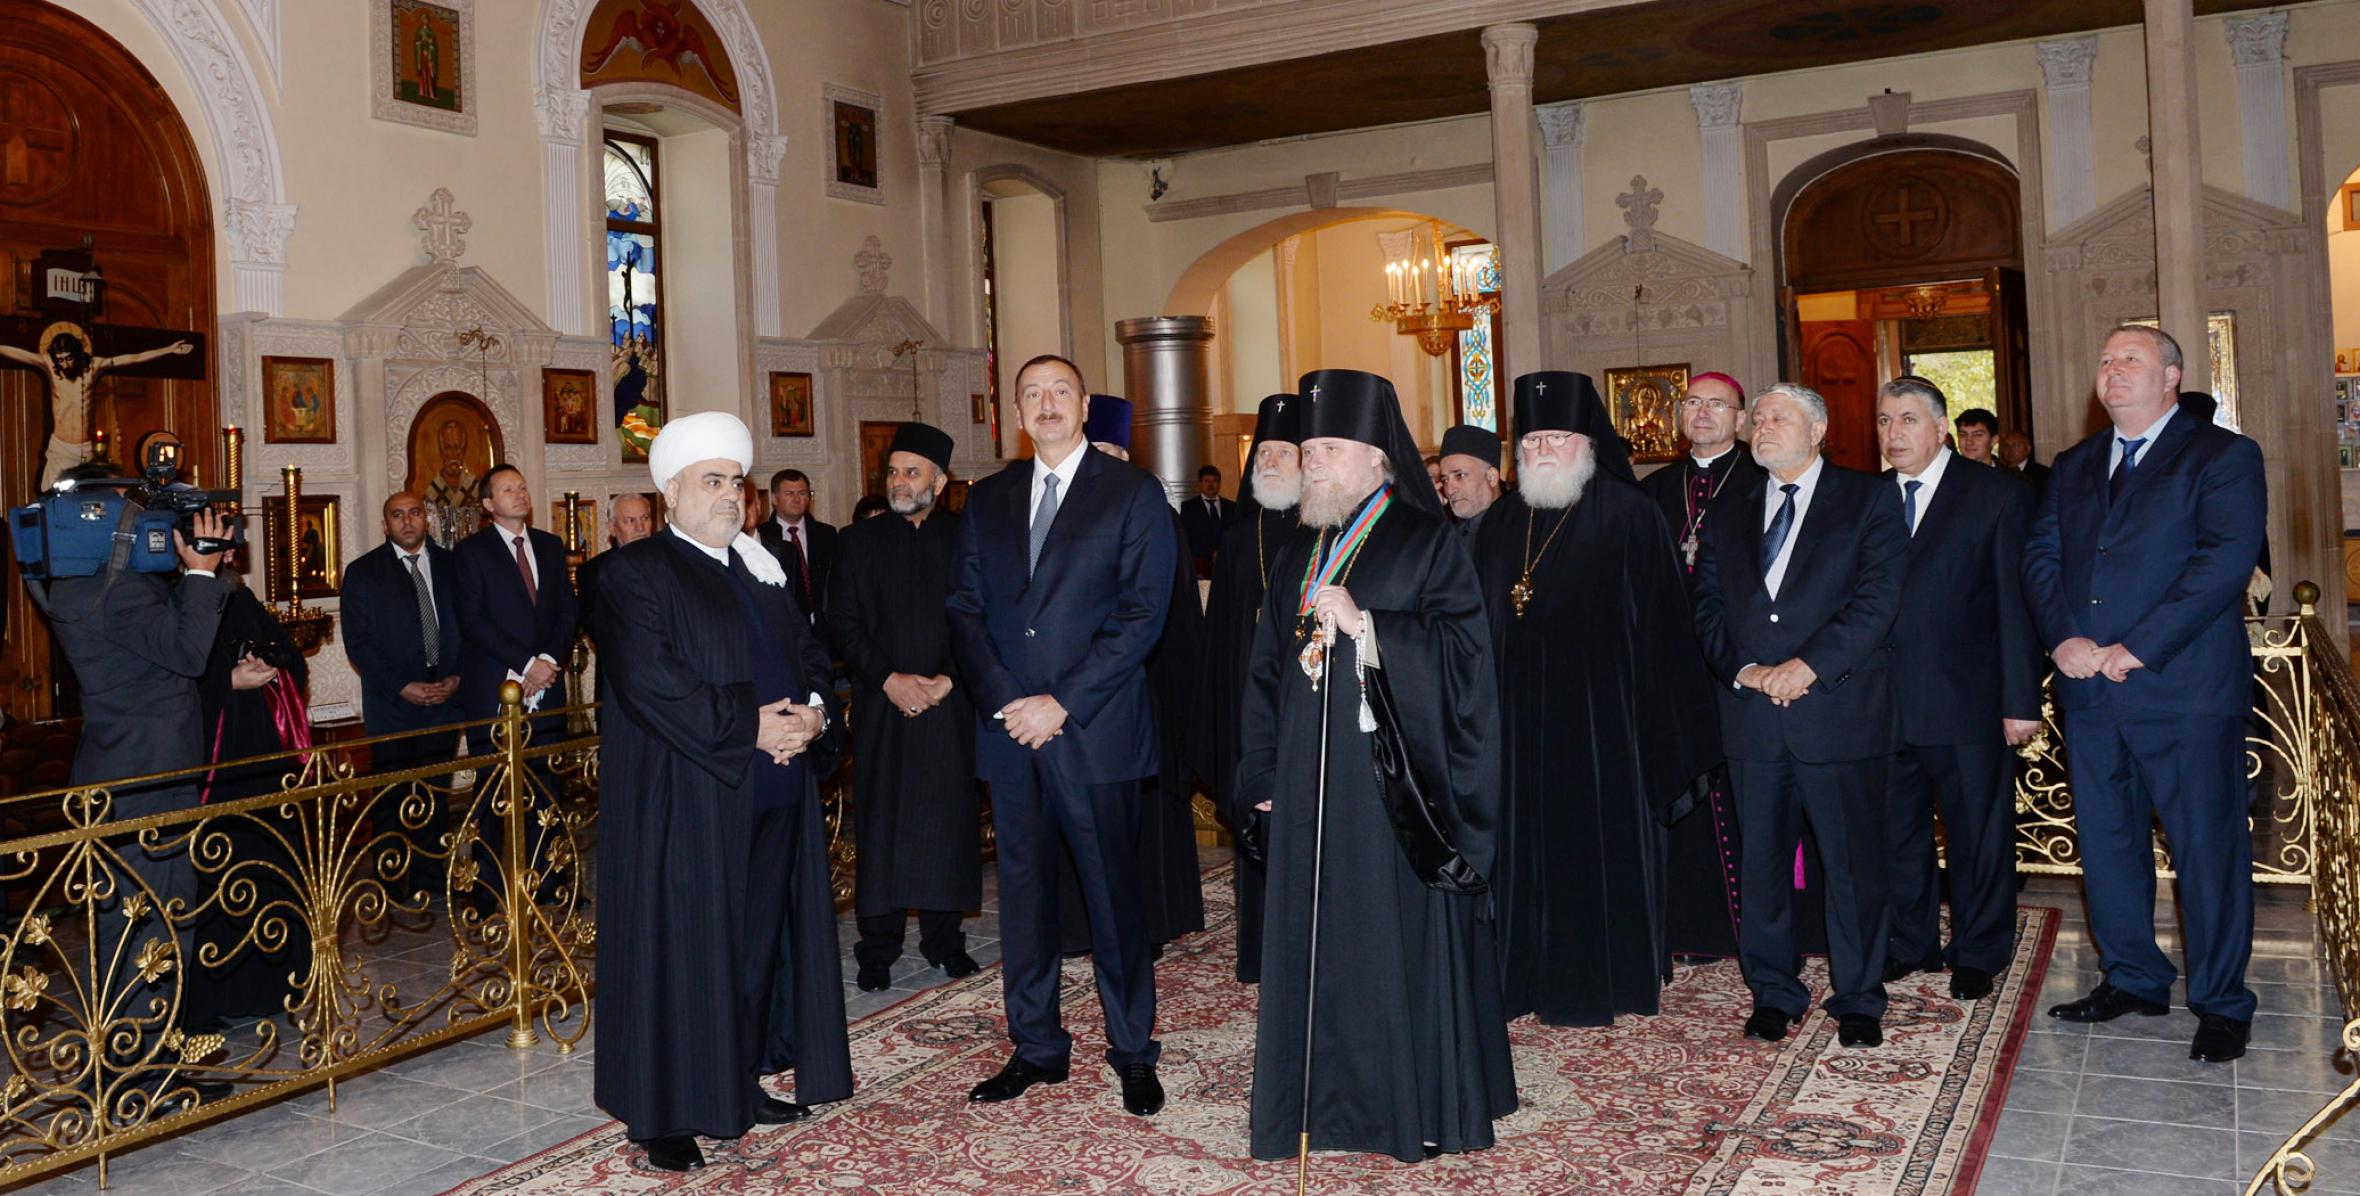 Ilham Aliyev attended the opening of the Orthodox Religious-Cultural Centre of the Baku and Azerbaijan Diocese